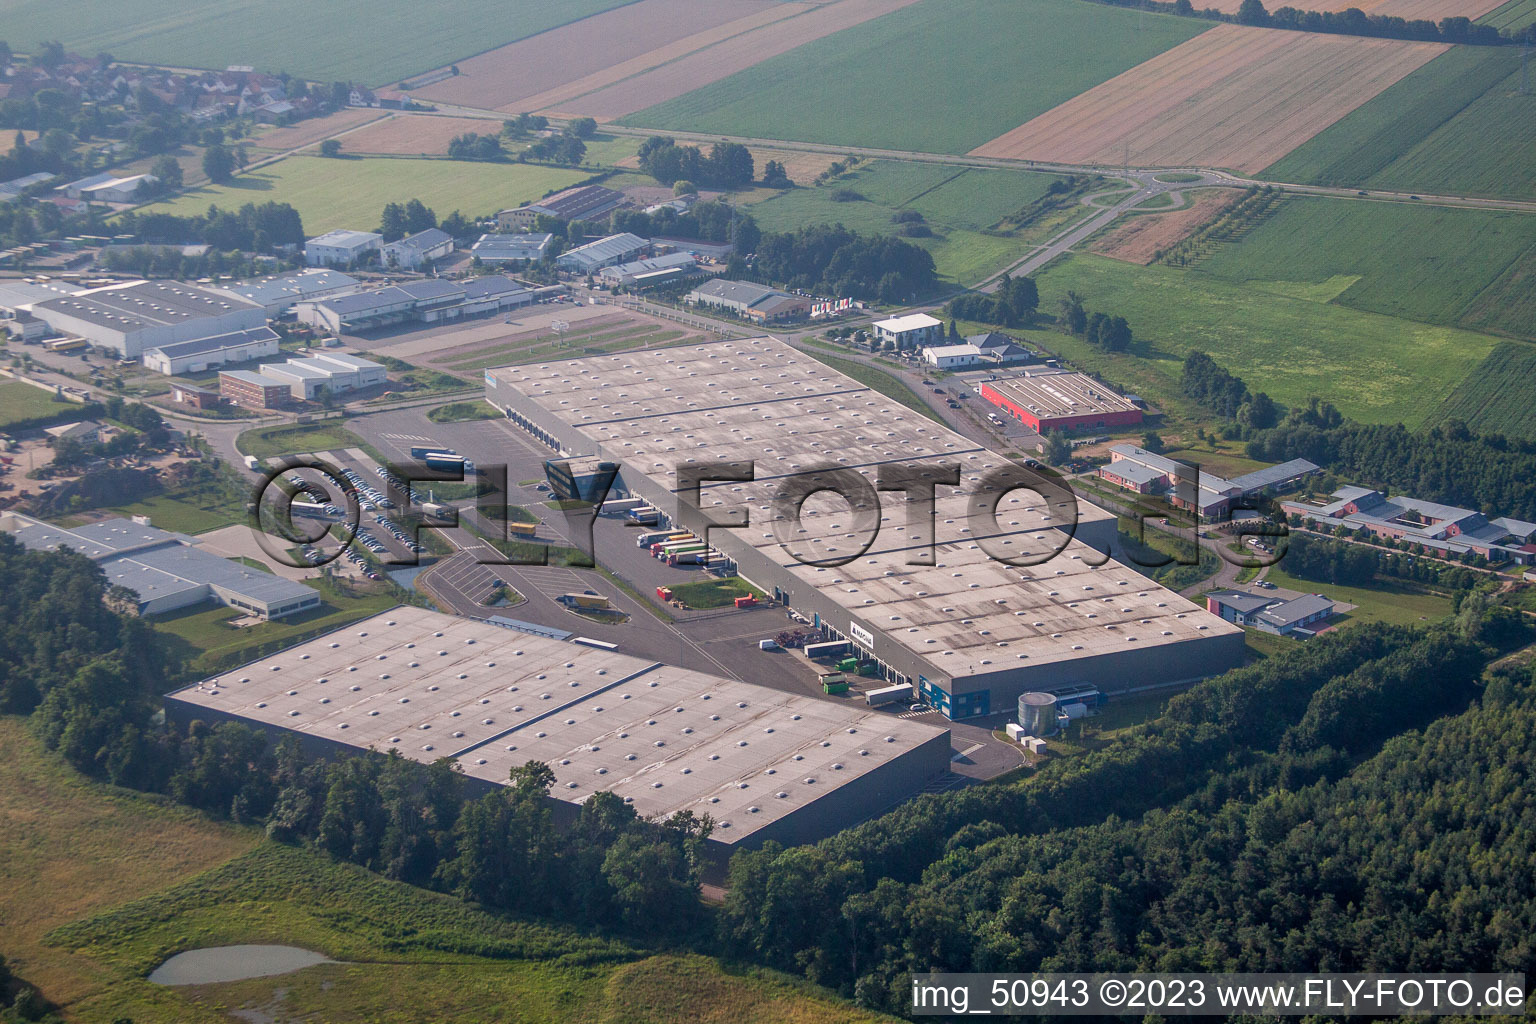 Horst industrial area, coincidence logistics center in the district Minderslachen in Kandel in the state Rhineland-Palatinate, Germany from the drone perspective